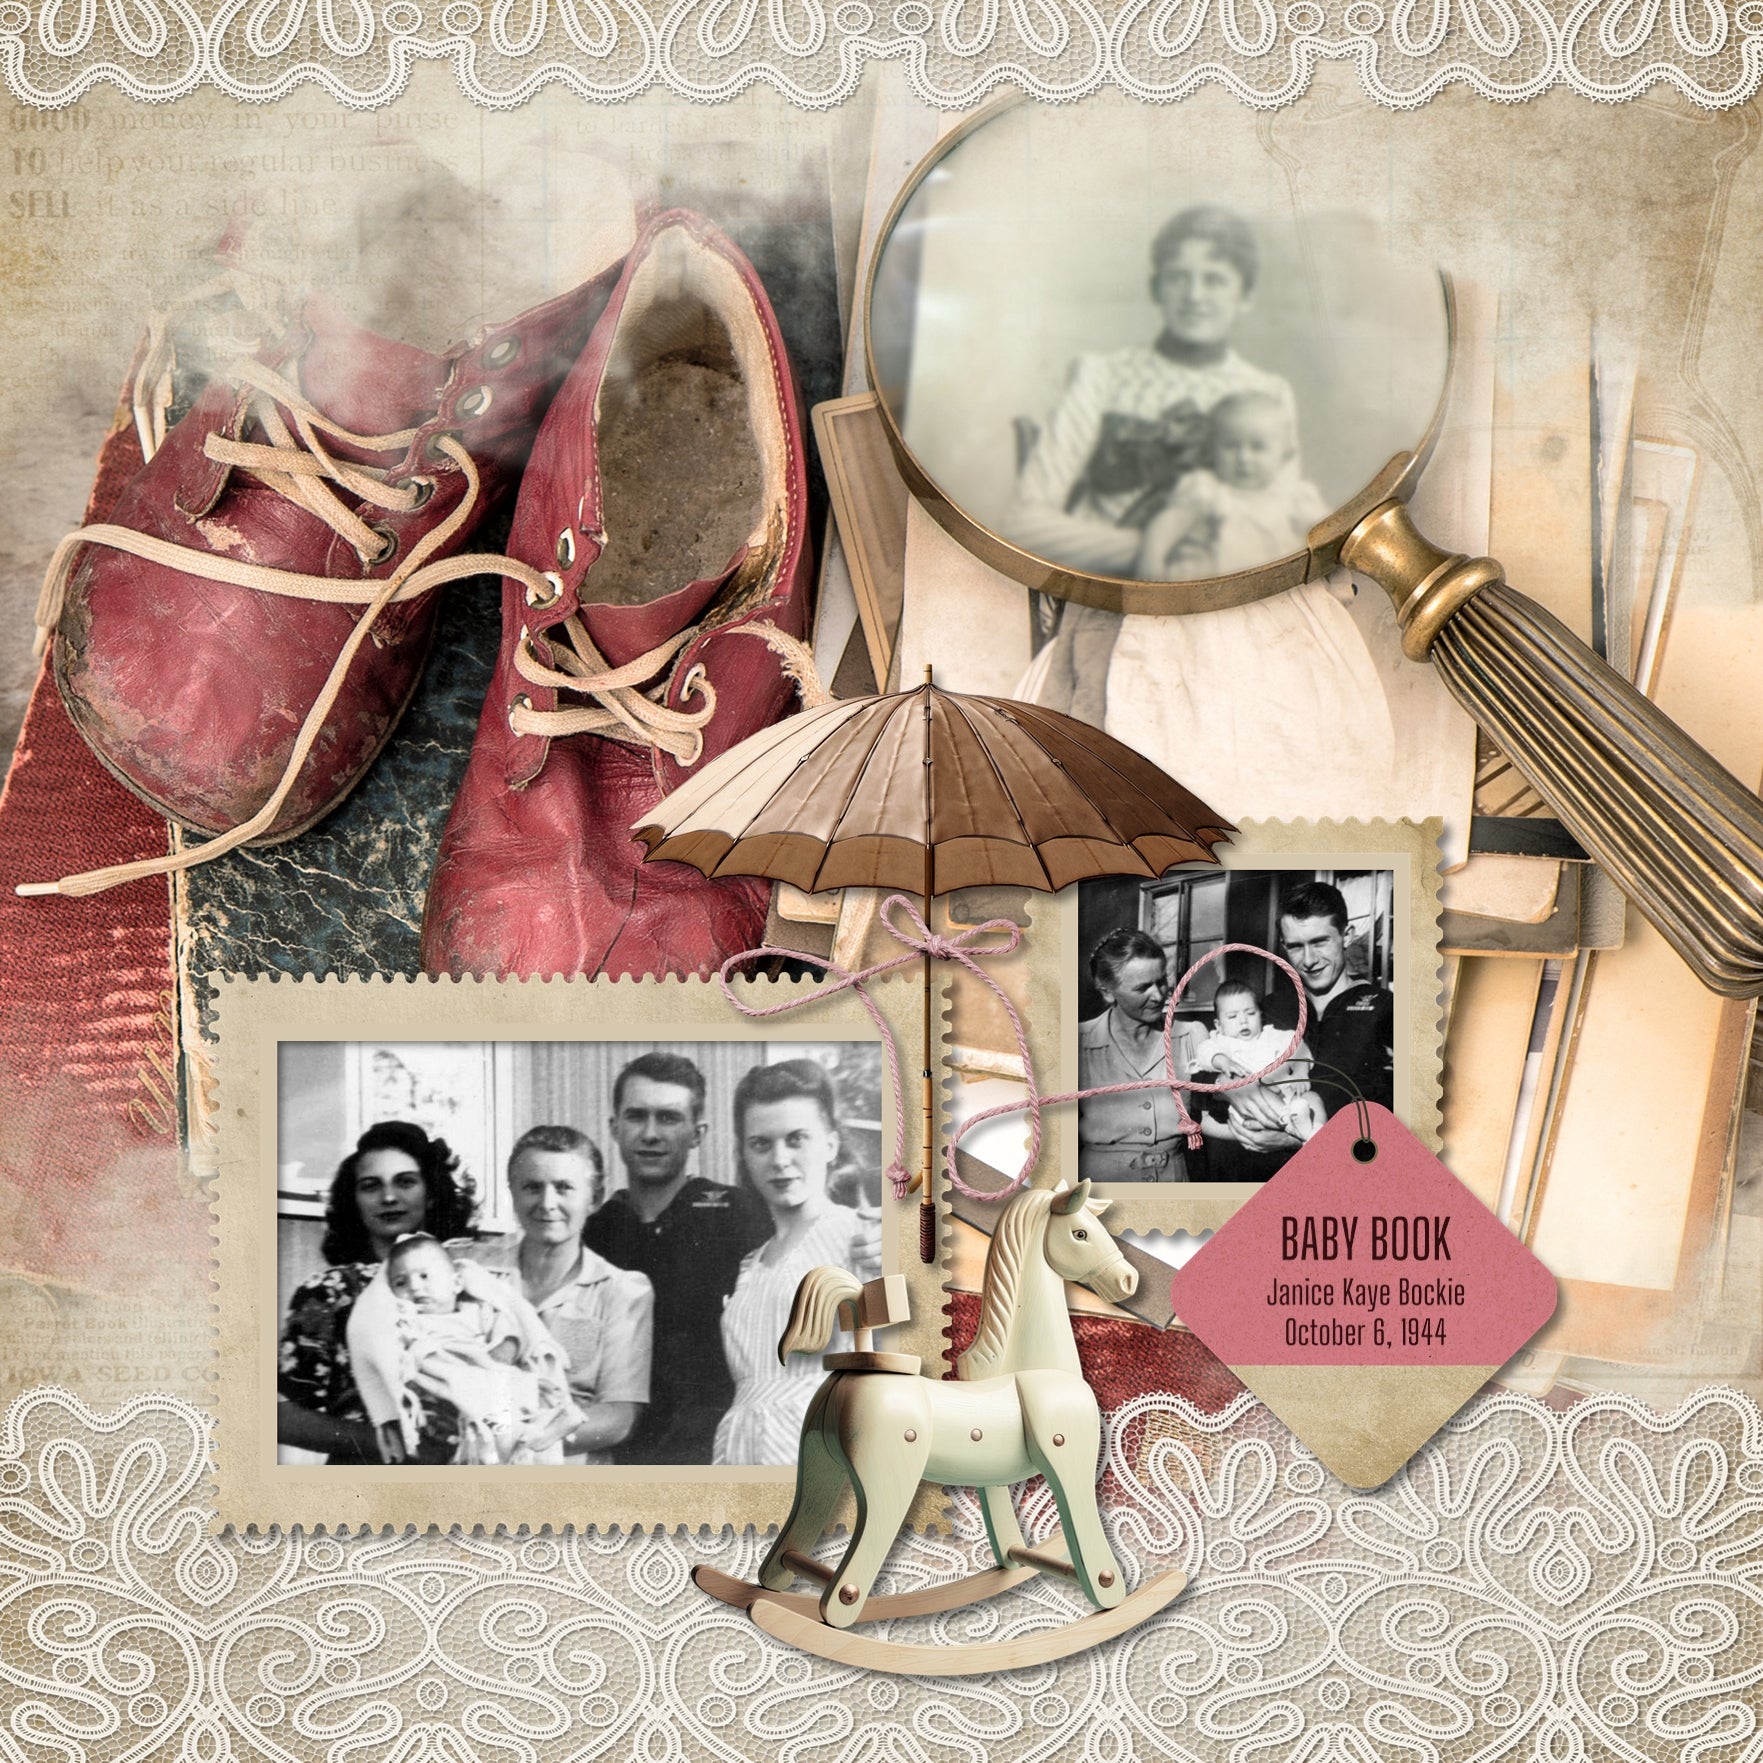 Great for genealogy and family history albums and keepsake digital art pages, these digital scrapbooking antique newsprint papers by Lucky Girl Creative digital art are perfect for layering with your antique photographs to add that vintage touch. Whether you love browsing through a flea market, vintage market, rummage or garage sale, these embellishments will showcase your treasured finds.